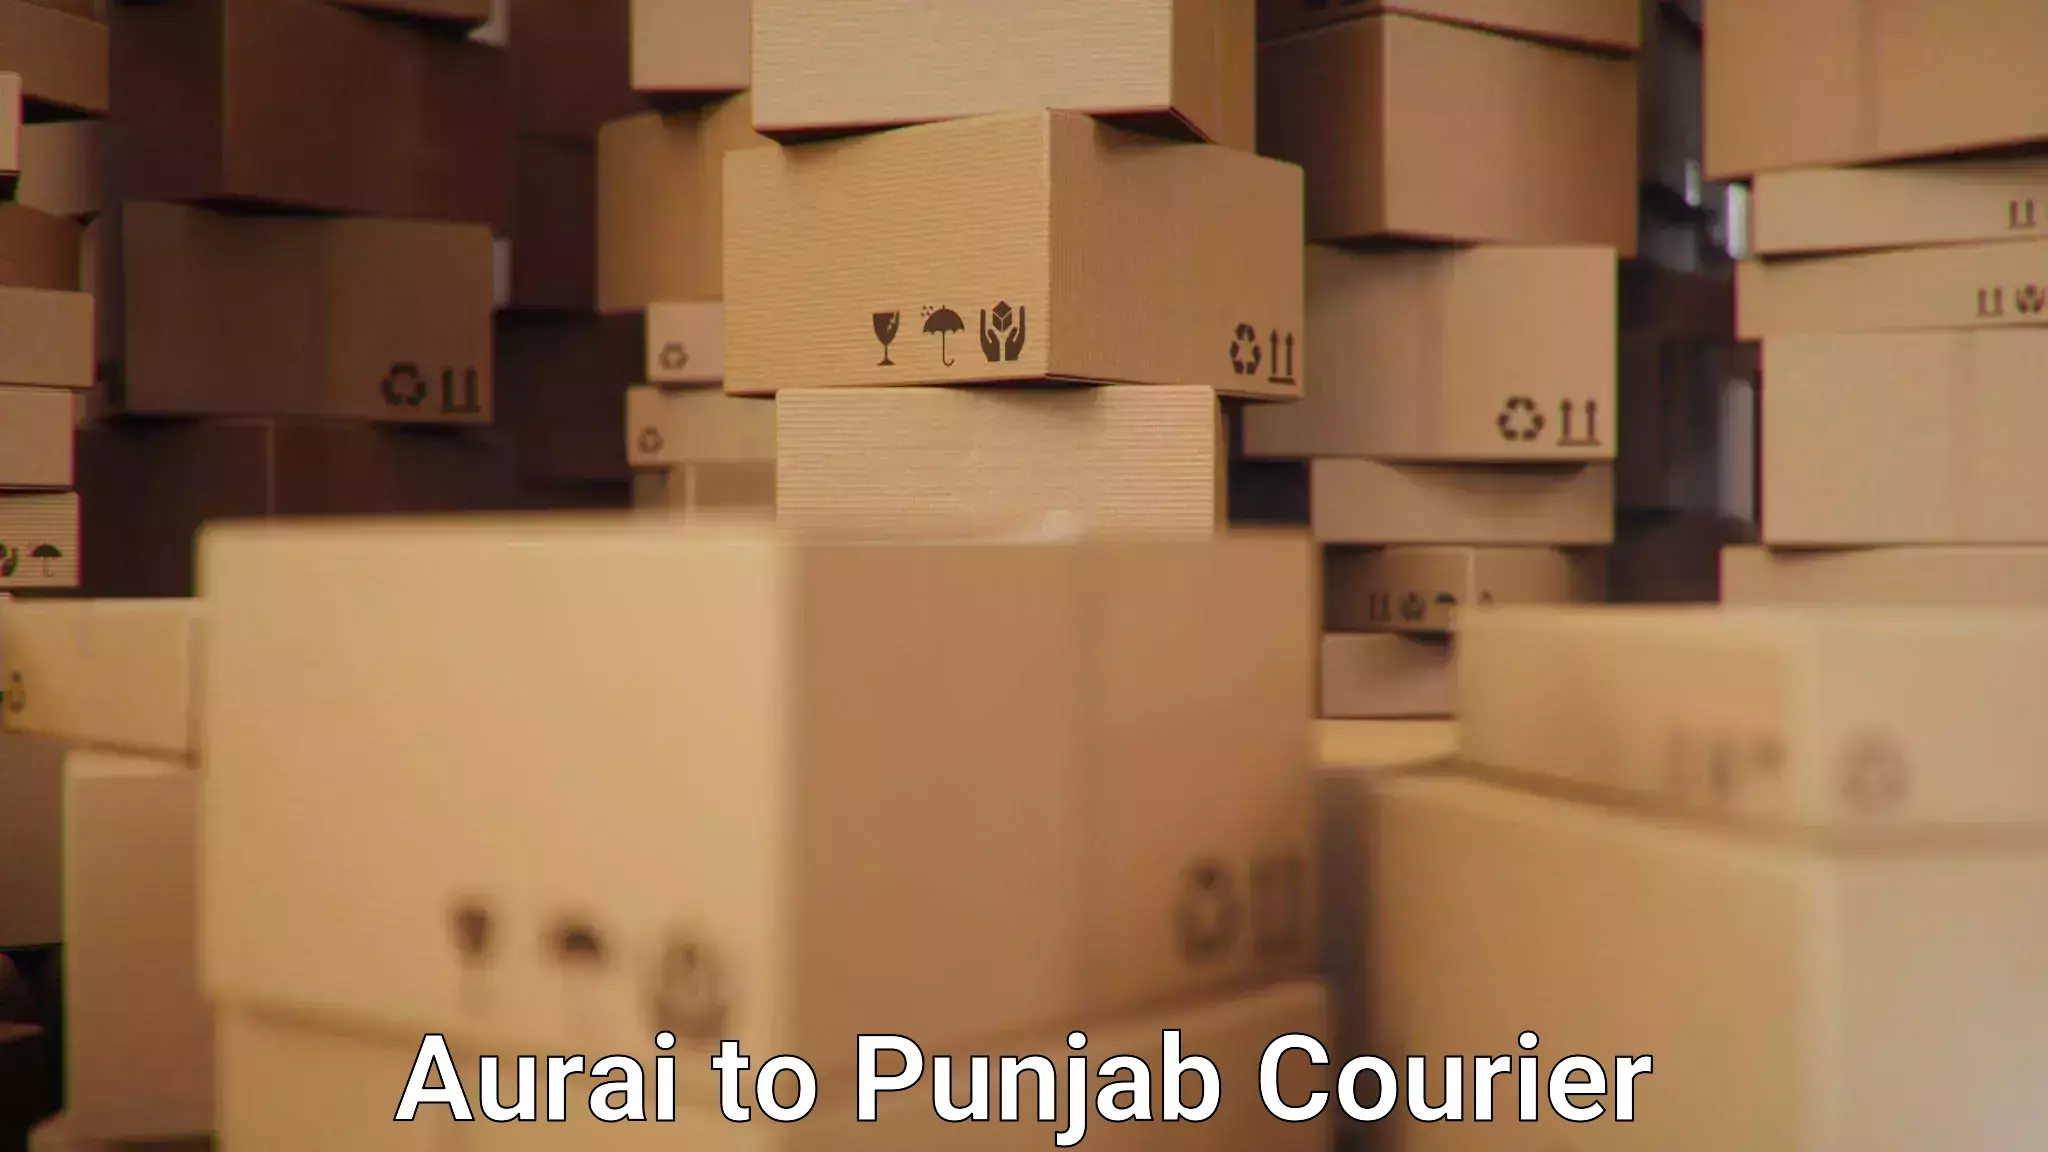 Express courier capabilities in Aurai to Punjab